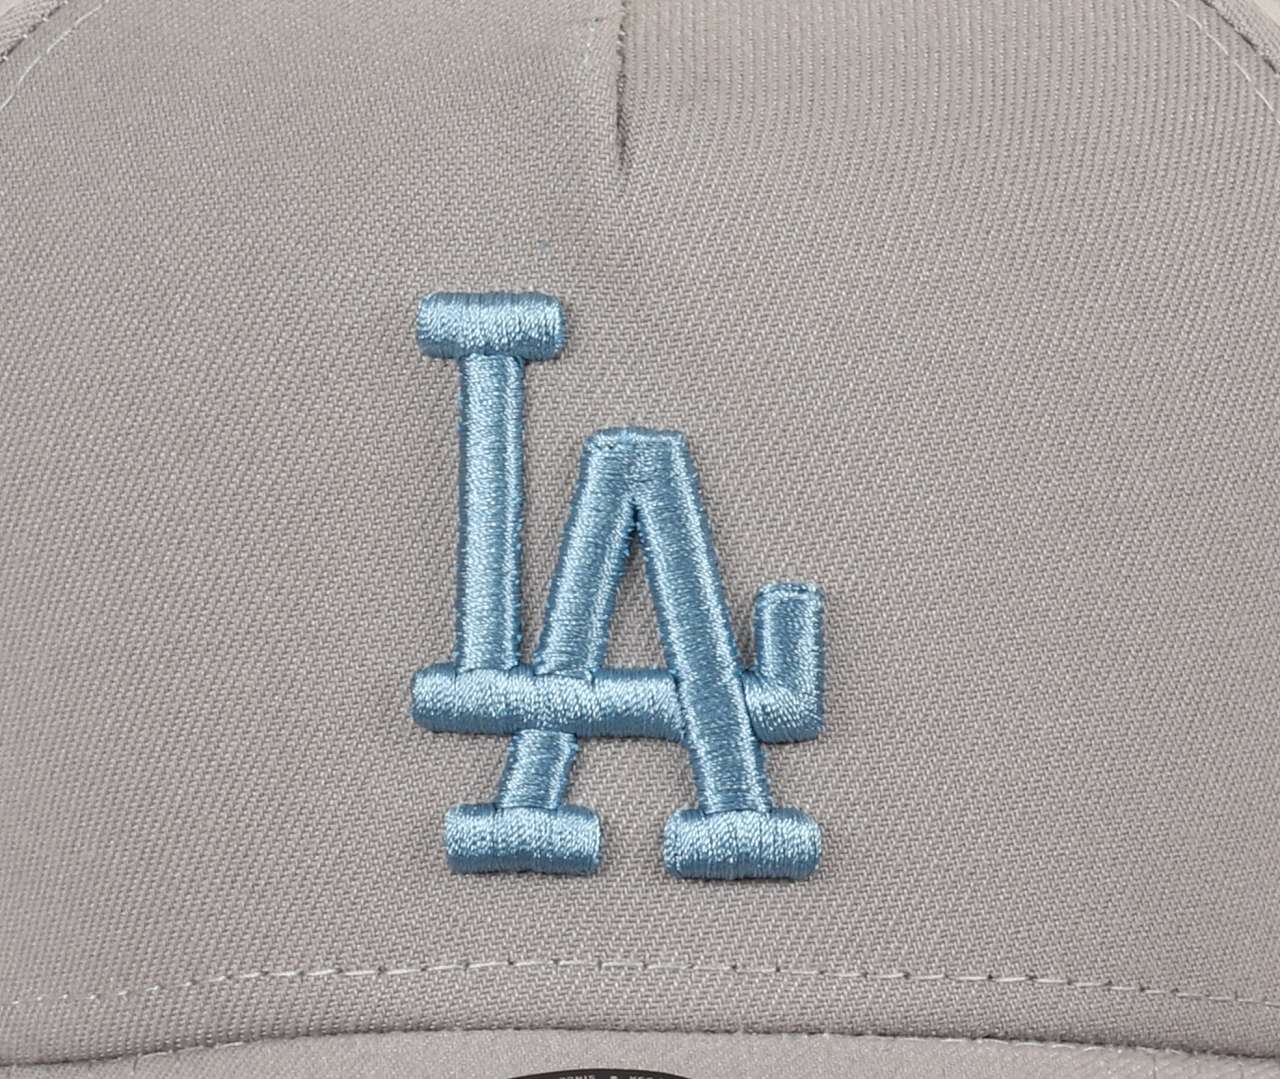 Los Angeles Dodgers MLB Dodgers Stadium Sidepatch Cooperstown Gray Sky 9Forty A-Frame Snapback Cap New Era